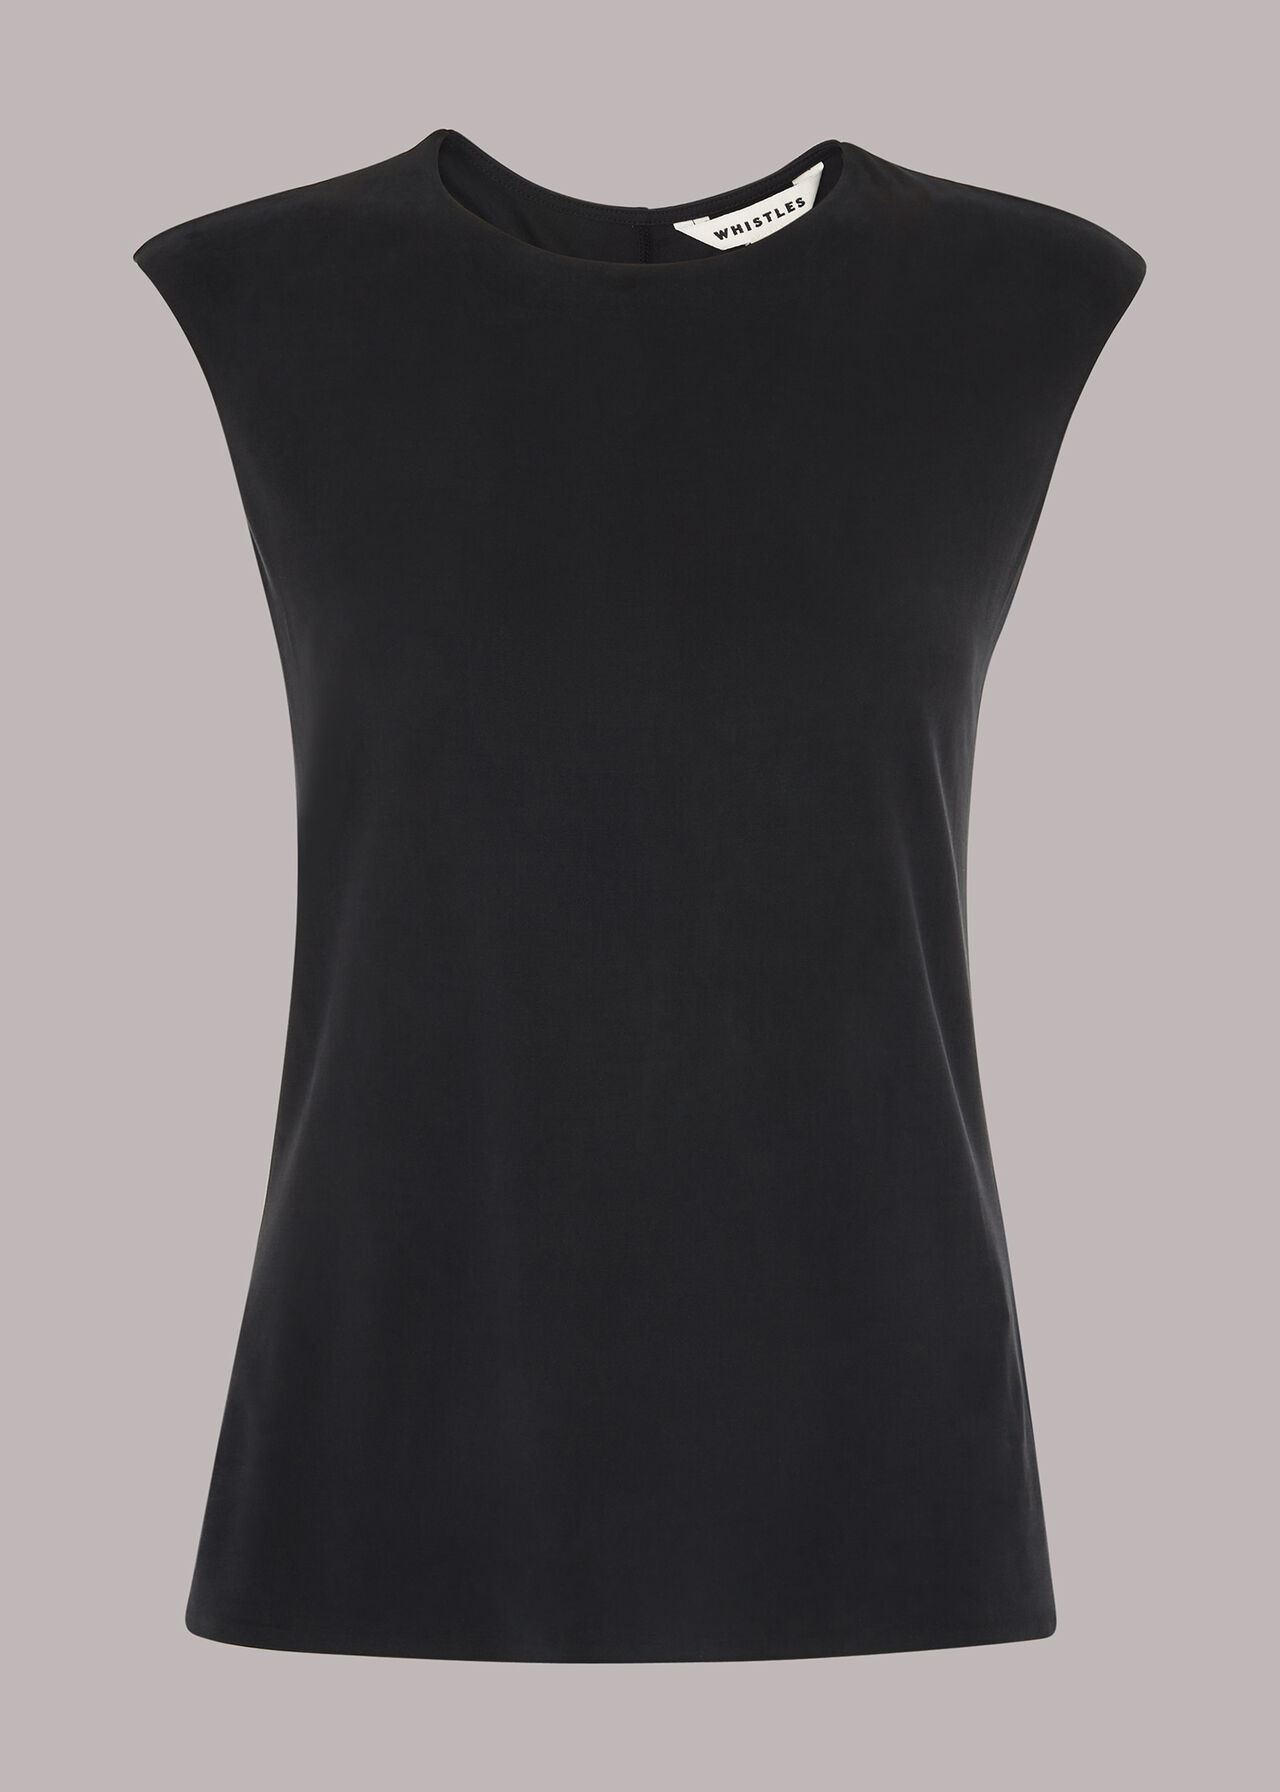 Black Keyhole Cut Out Cupro Top | WHISTLES